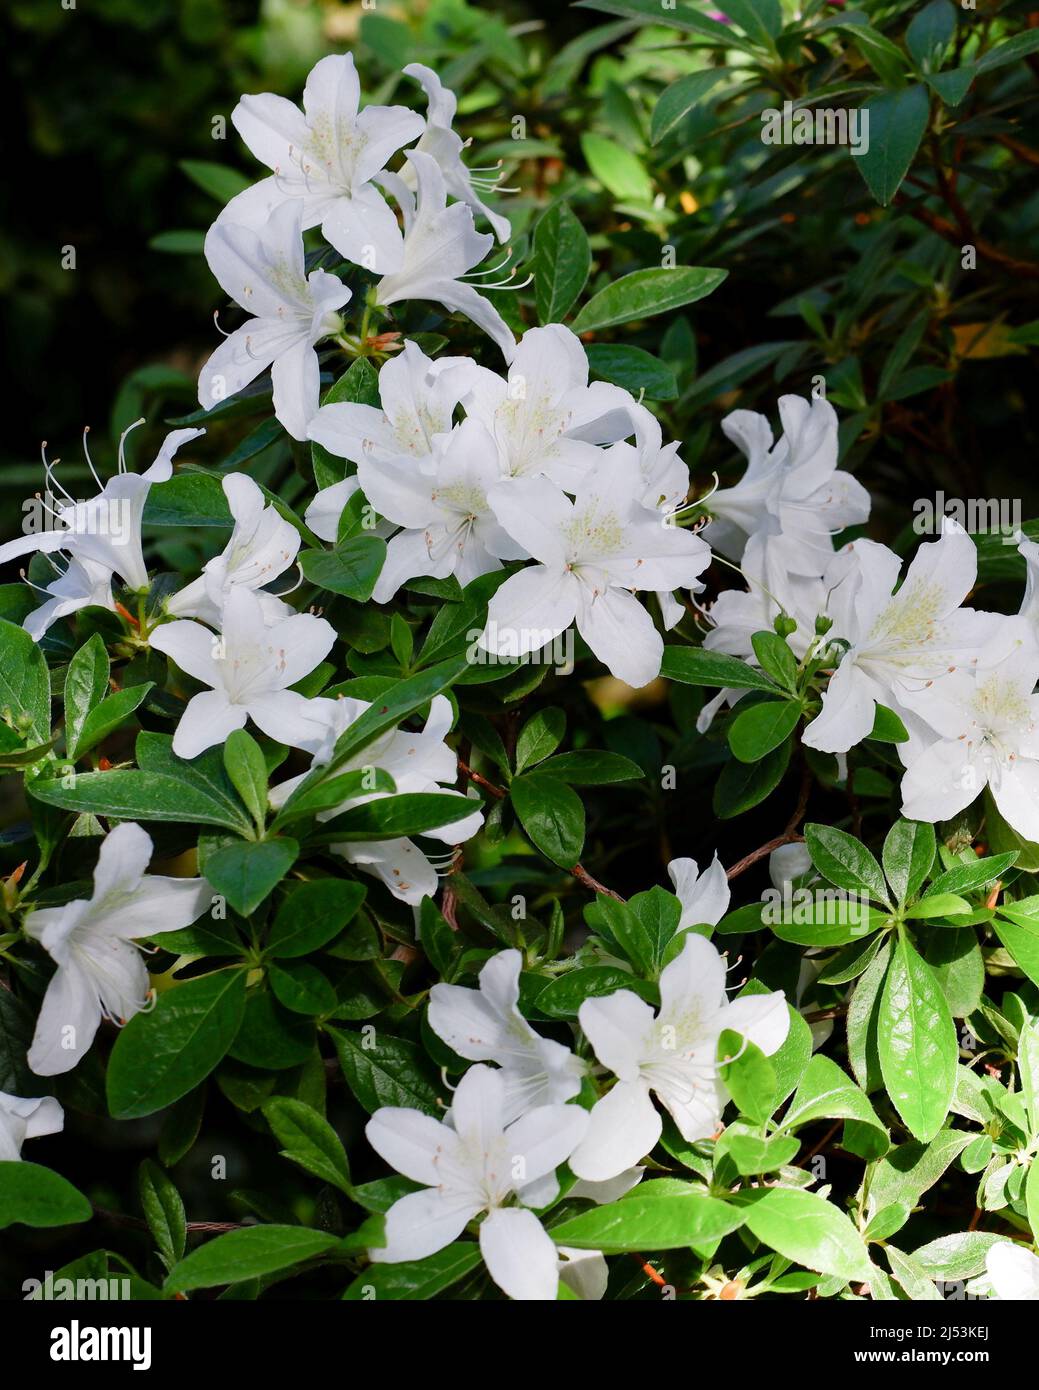 White rhododendron flowers in garden. Huge Rhododendron bush with white blossom. Beautiful blooming texture background. Stock Photo